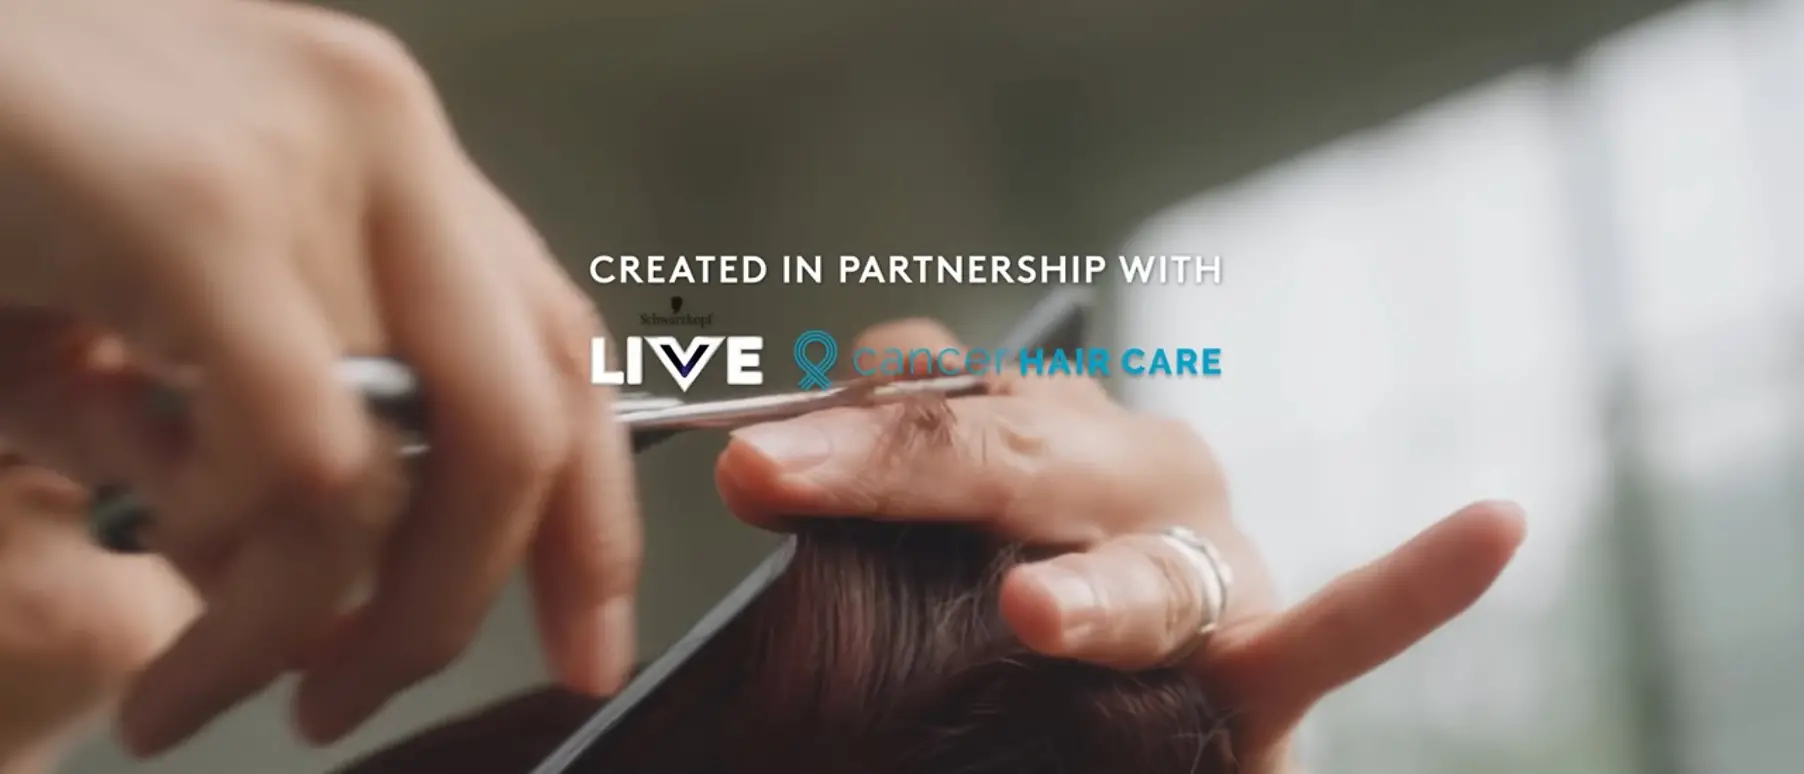 Schwarzkopf LIVE partners with Cancer Hair Care